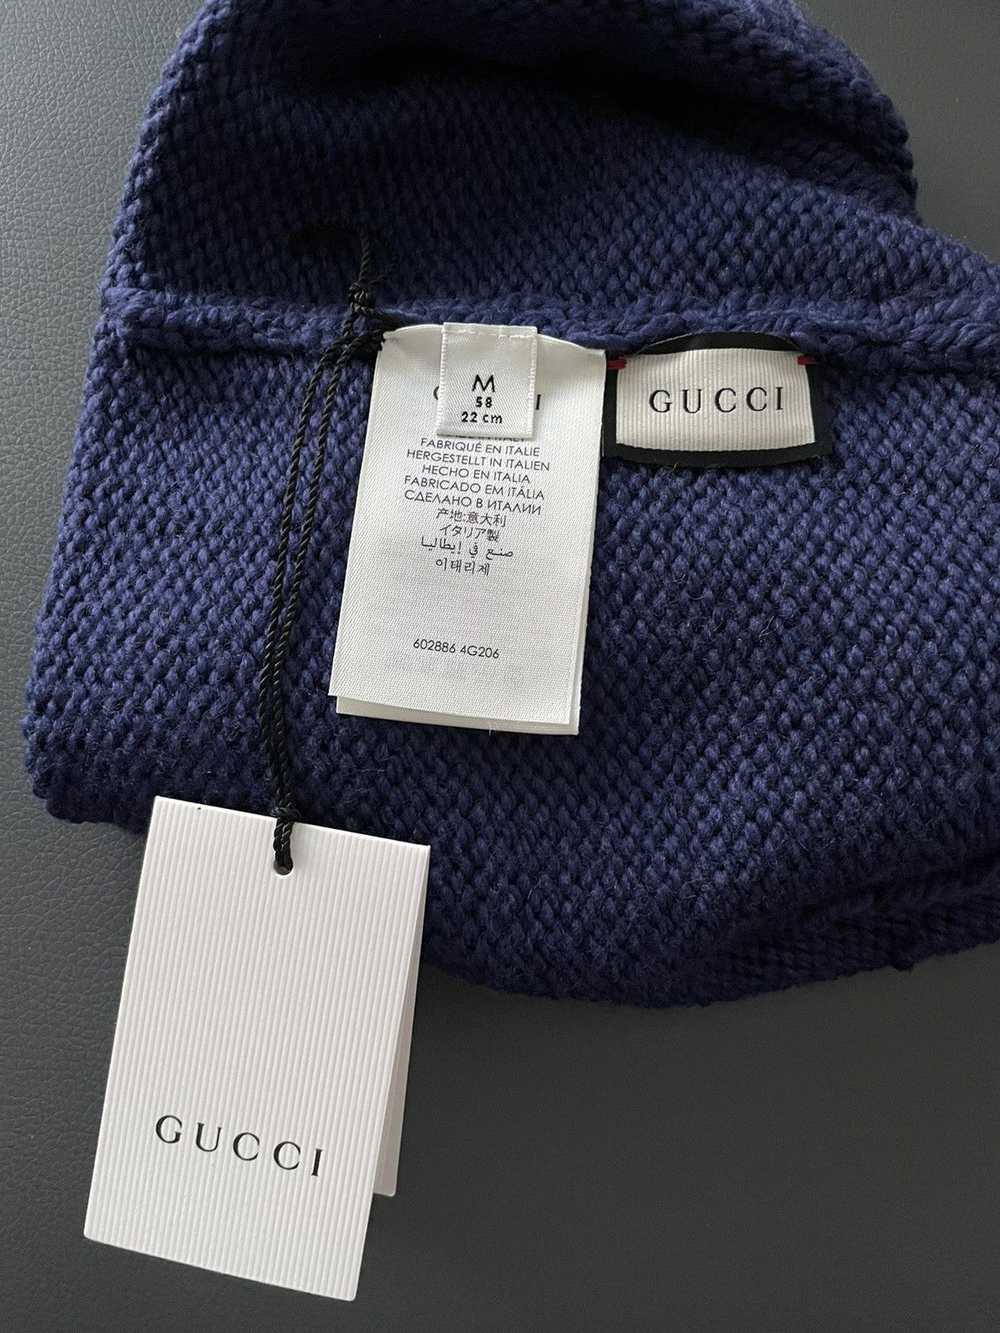 Gucci Rare Brand NEW Sold Out Runway 100% Virgin … - image 3